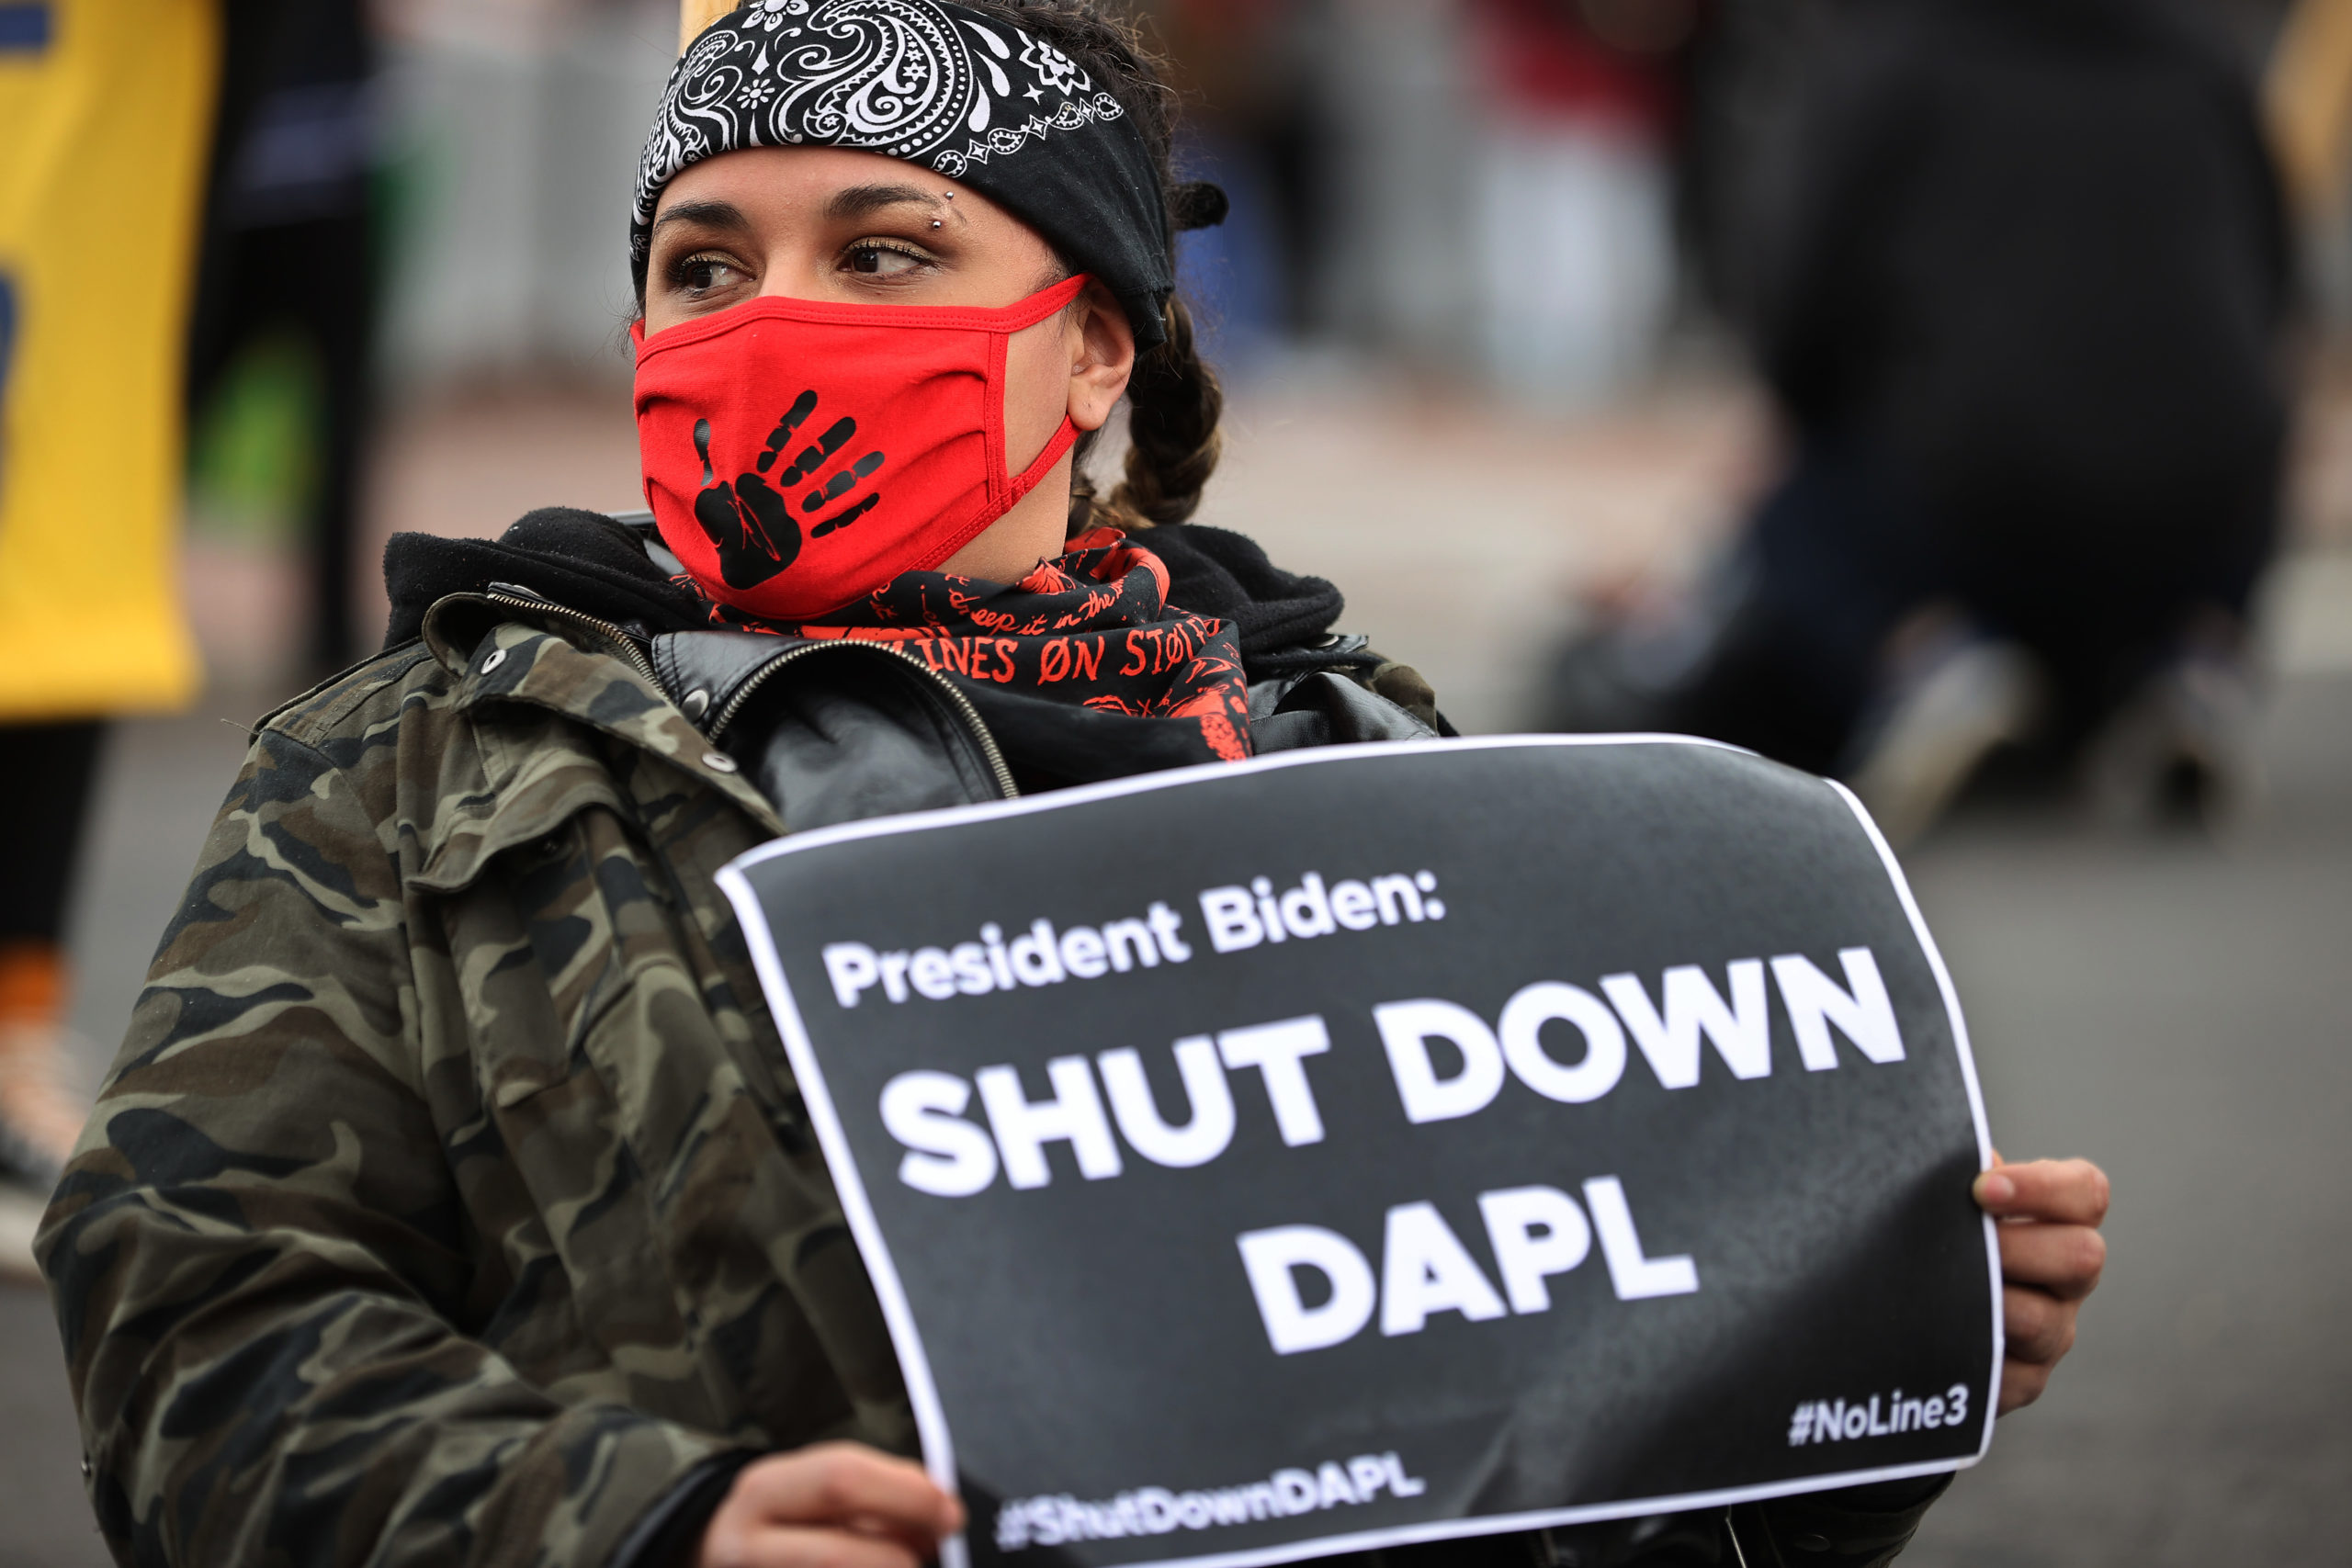 An indigenous environmental activist helps block traffic near the White House as part of a protest against the Dakota Access pipeline on April 1, 2021. (Chip Somodevilla/Getty Images)